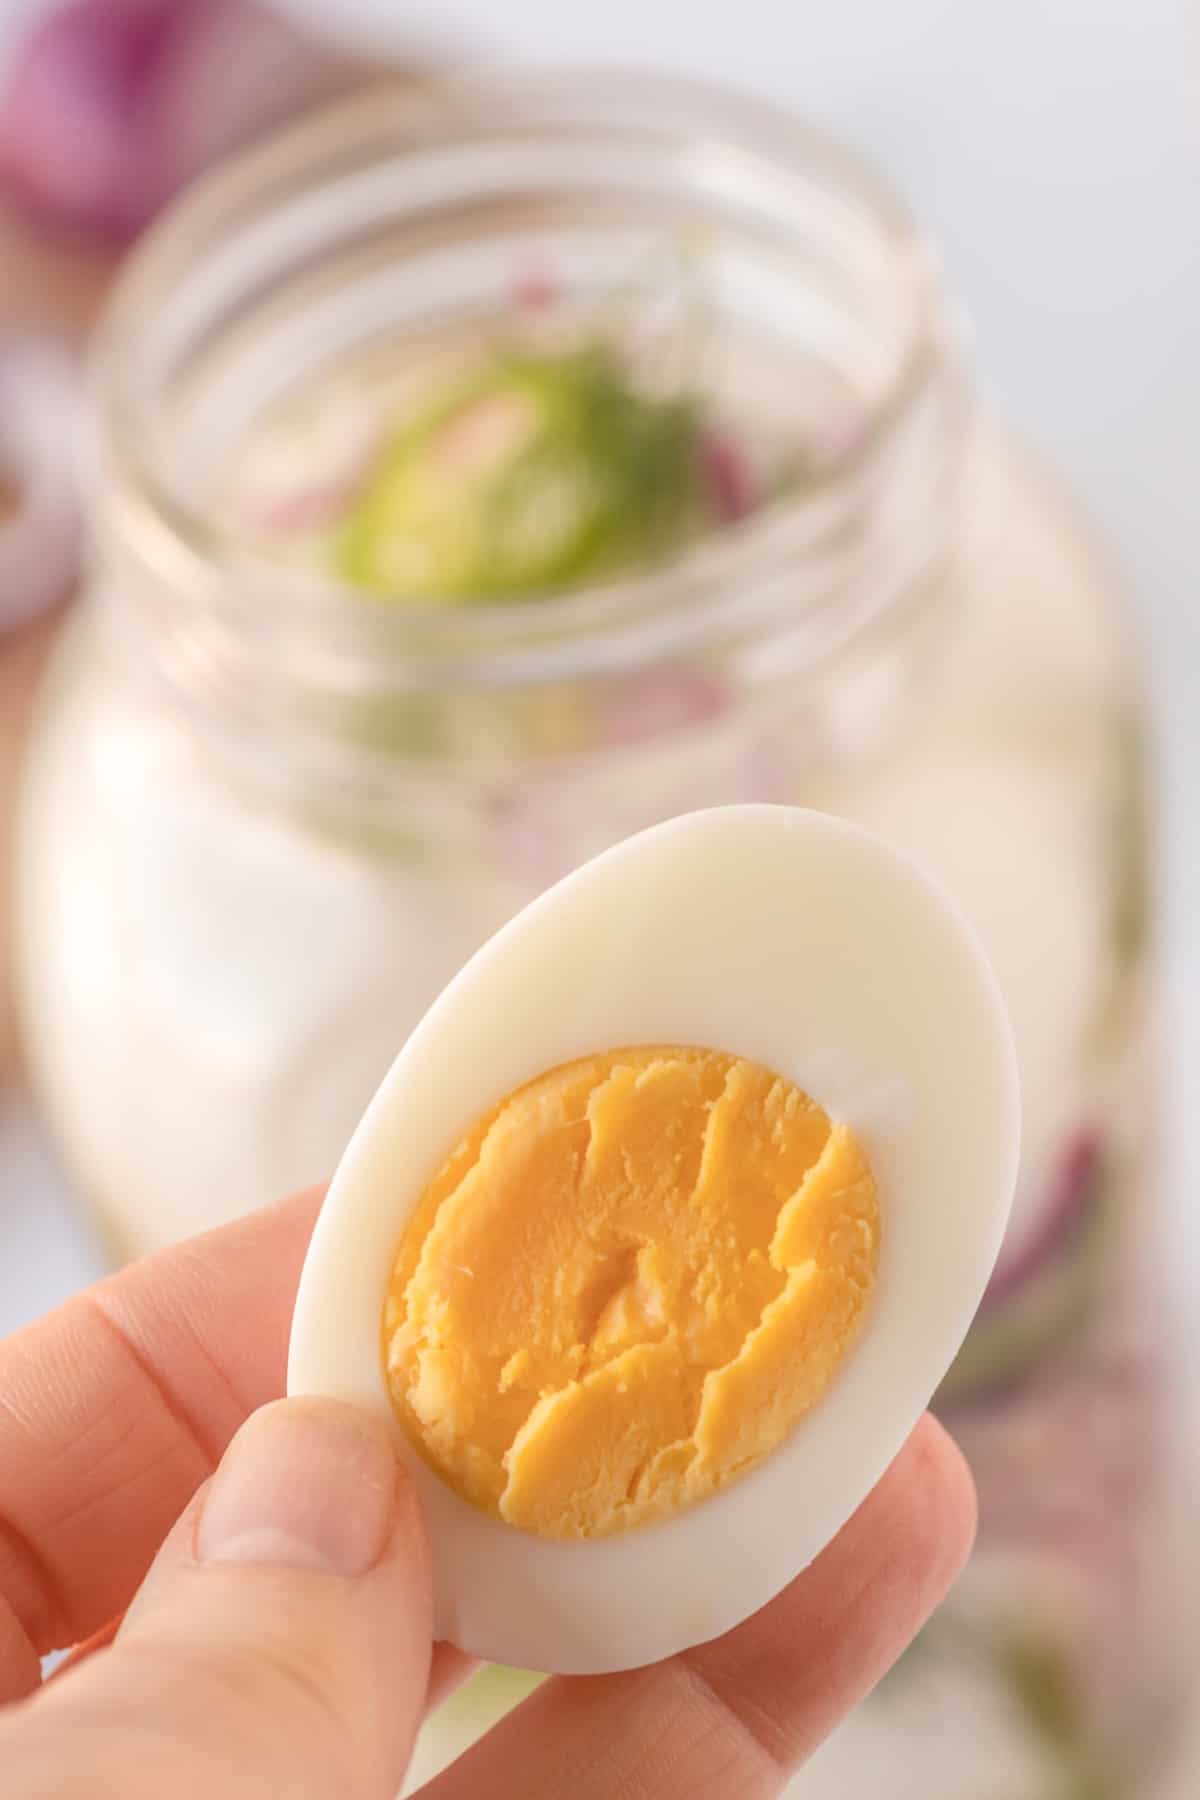 A person holding a hard boiled egg in front of a jar of pickled eggs.